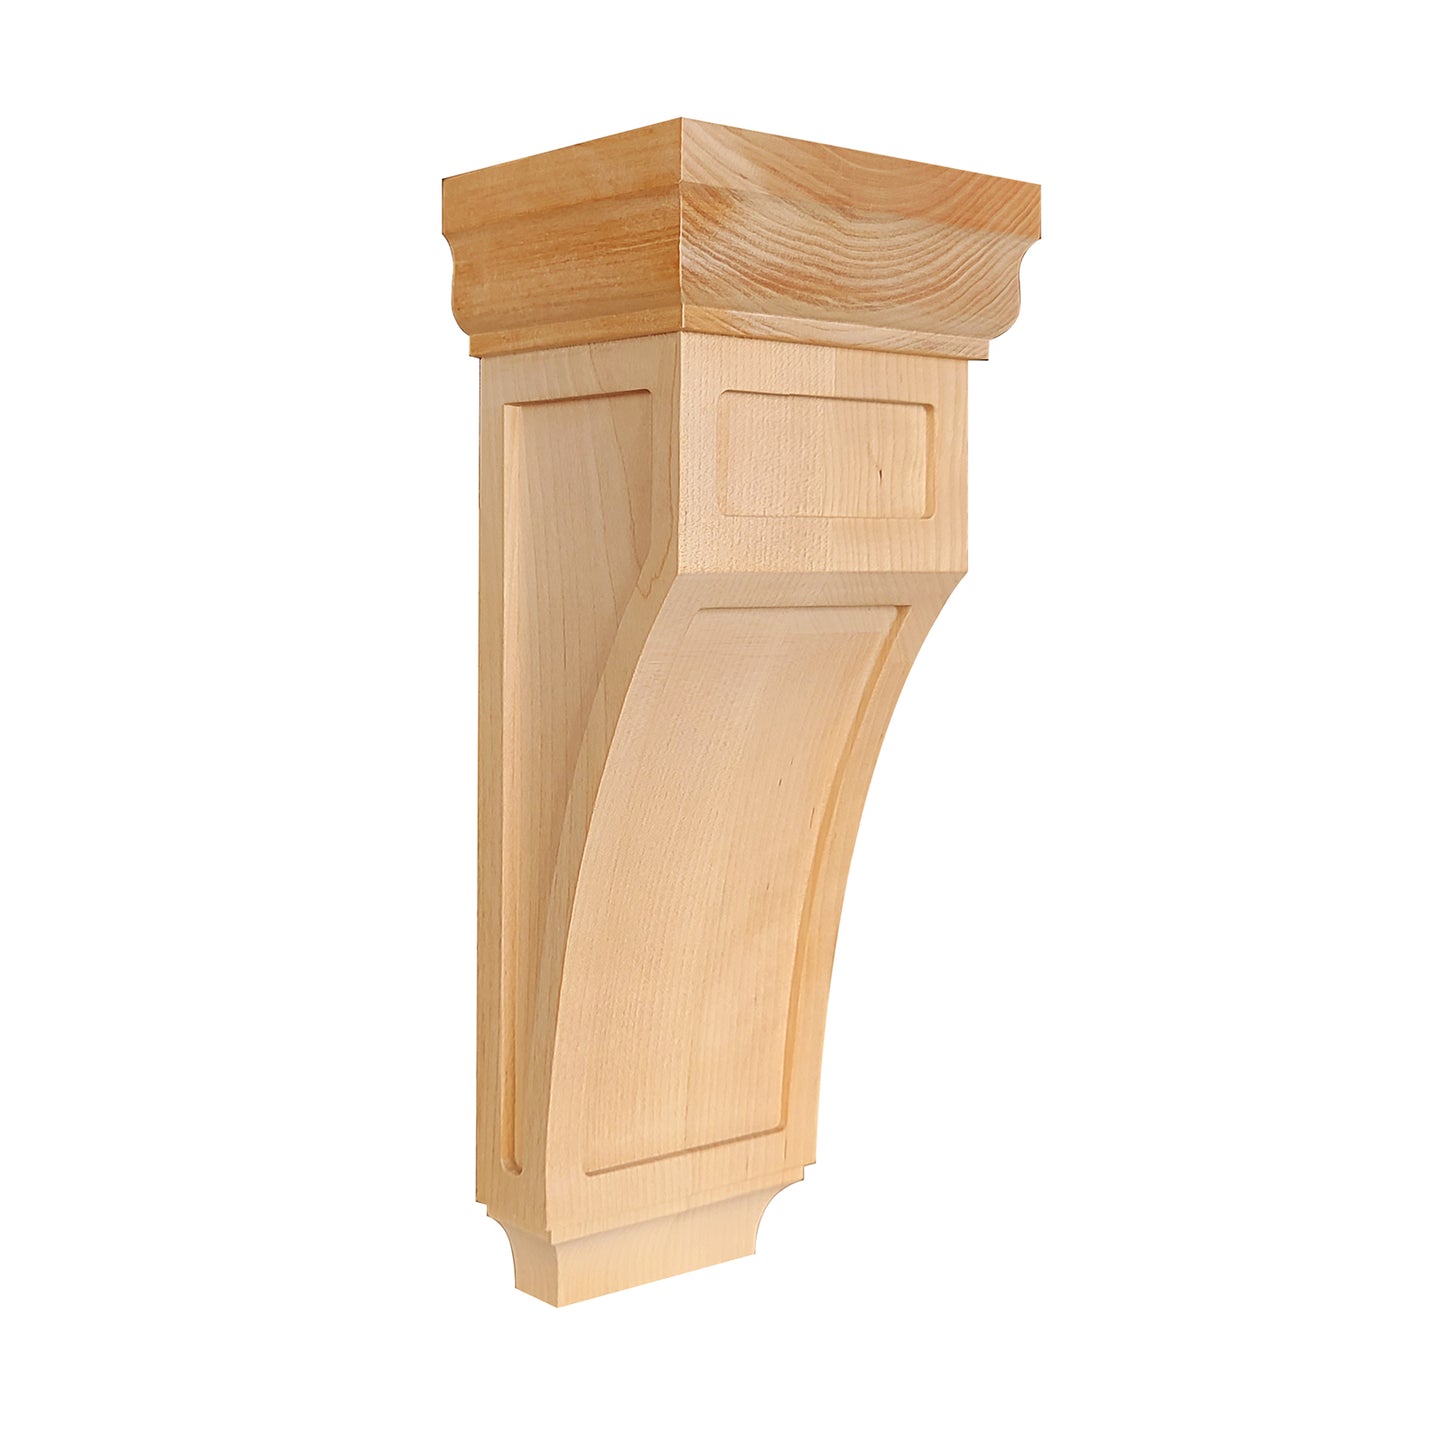 PAIR of Wood Carved Mission Corbels, Available in 4 sizes